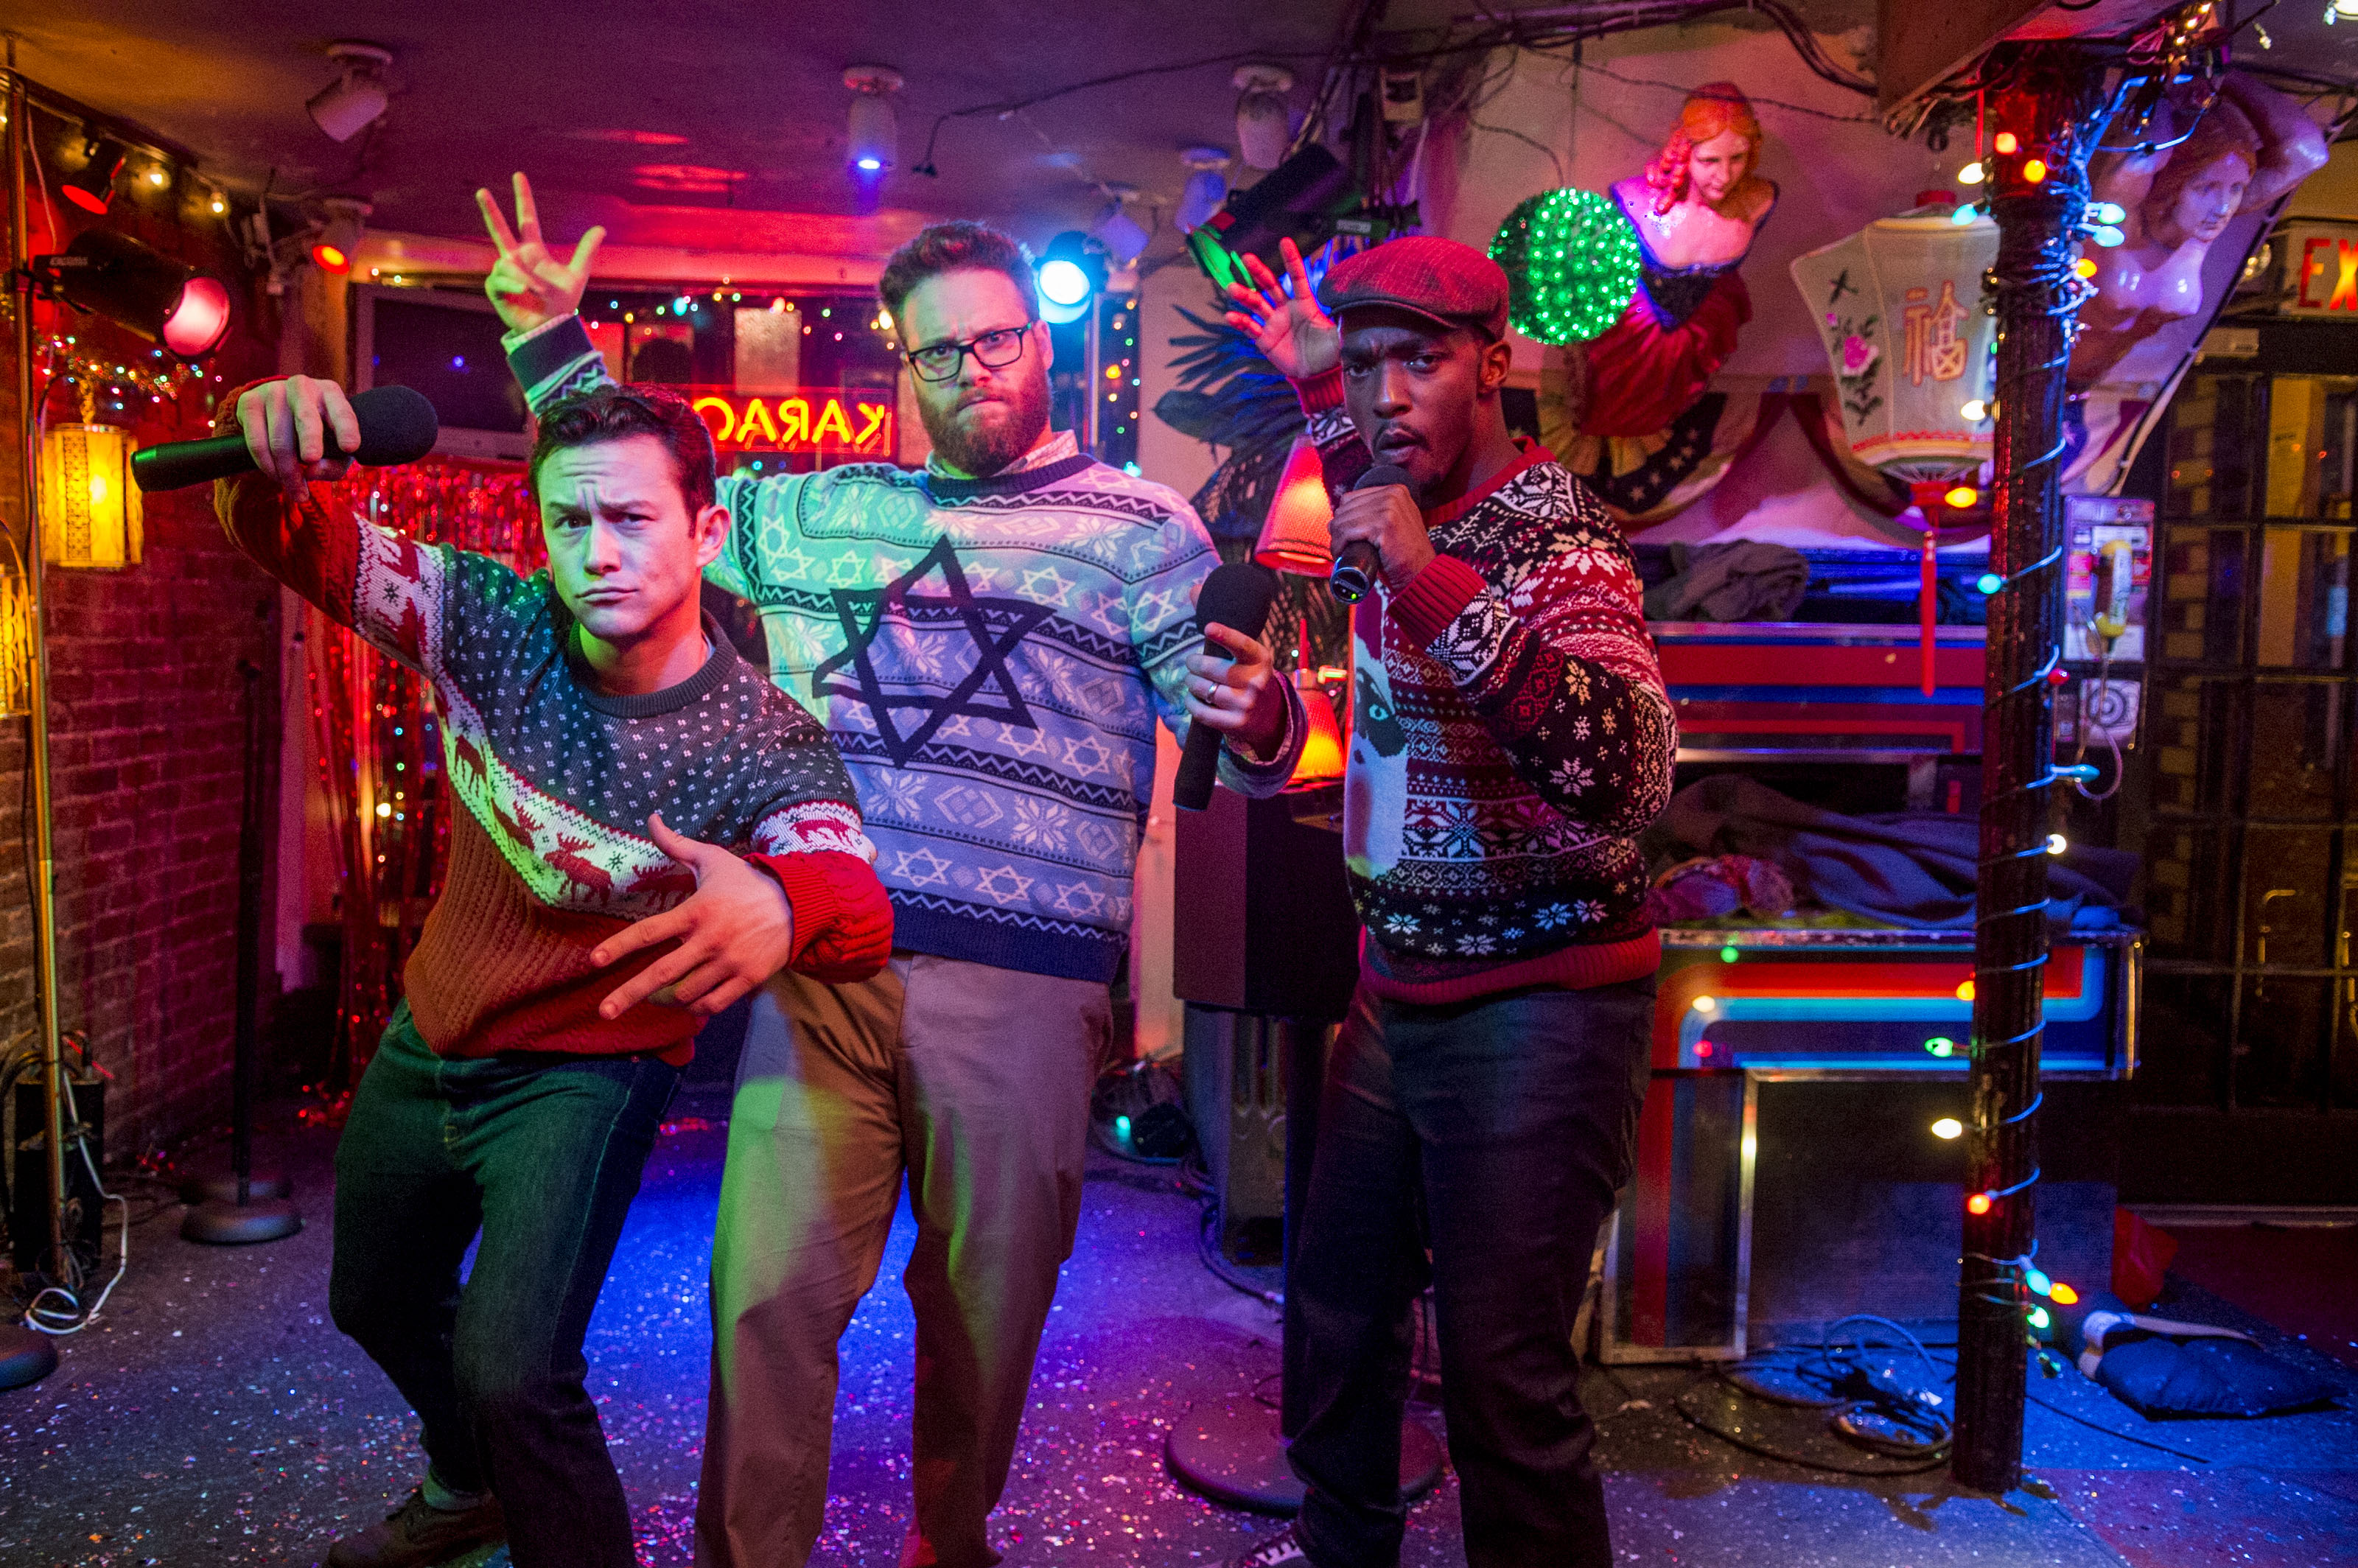 The Trailer For “The Night Before” Had Me In Stitches!!!